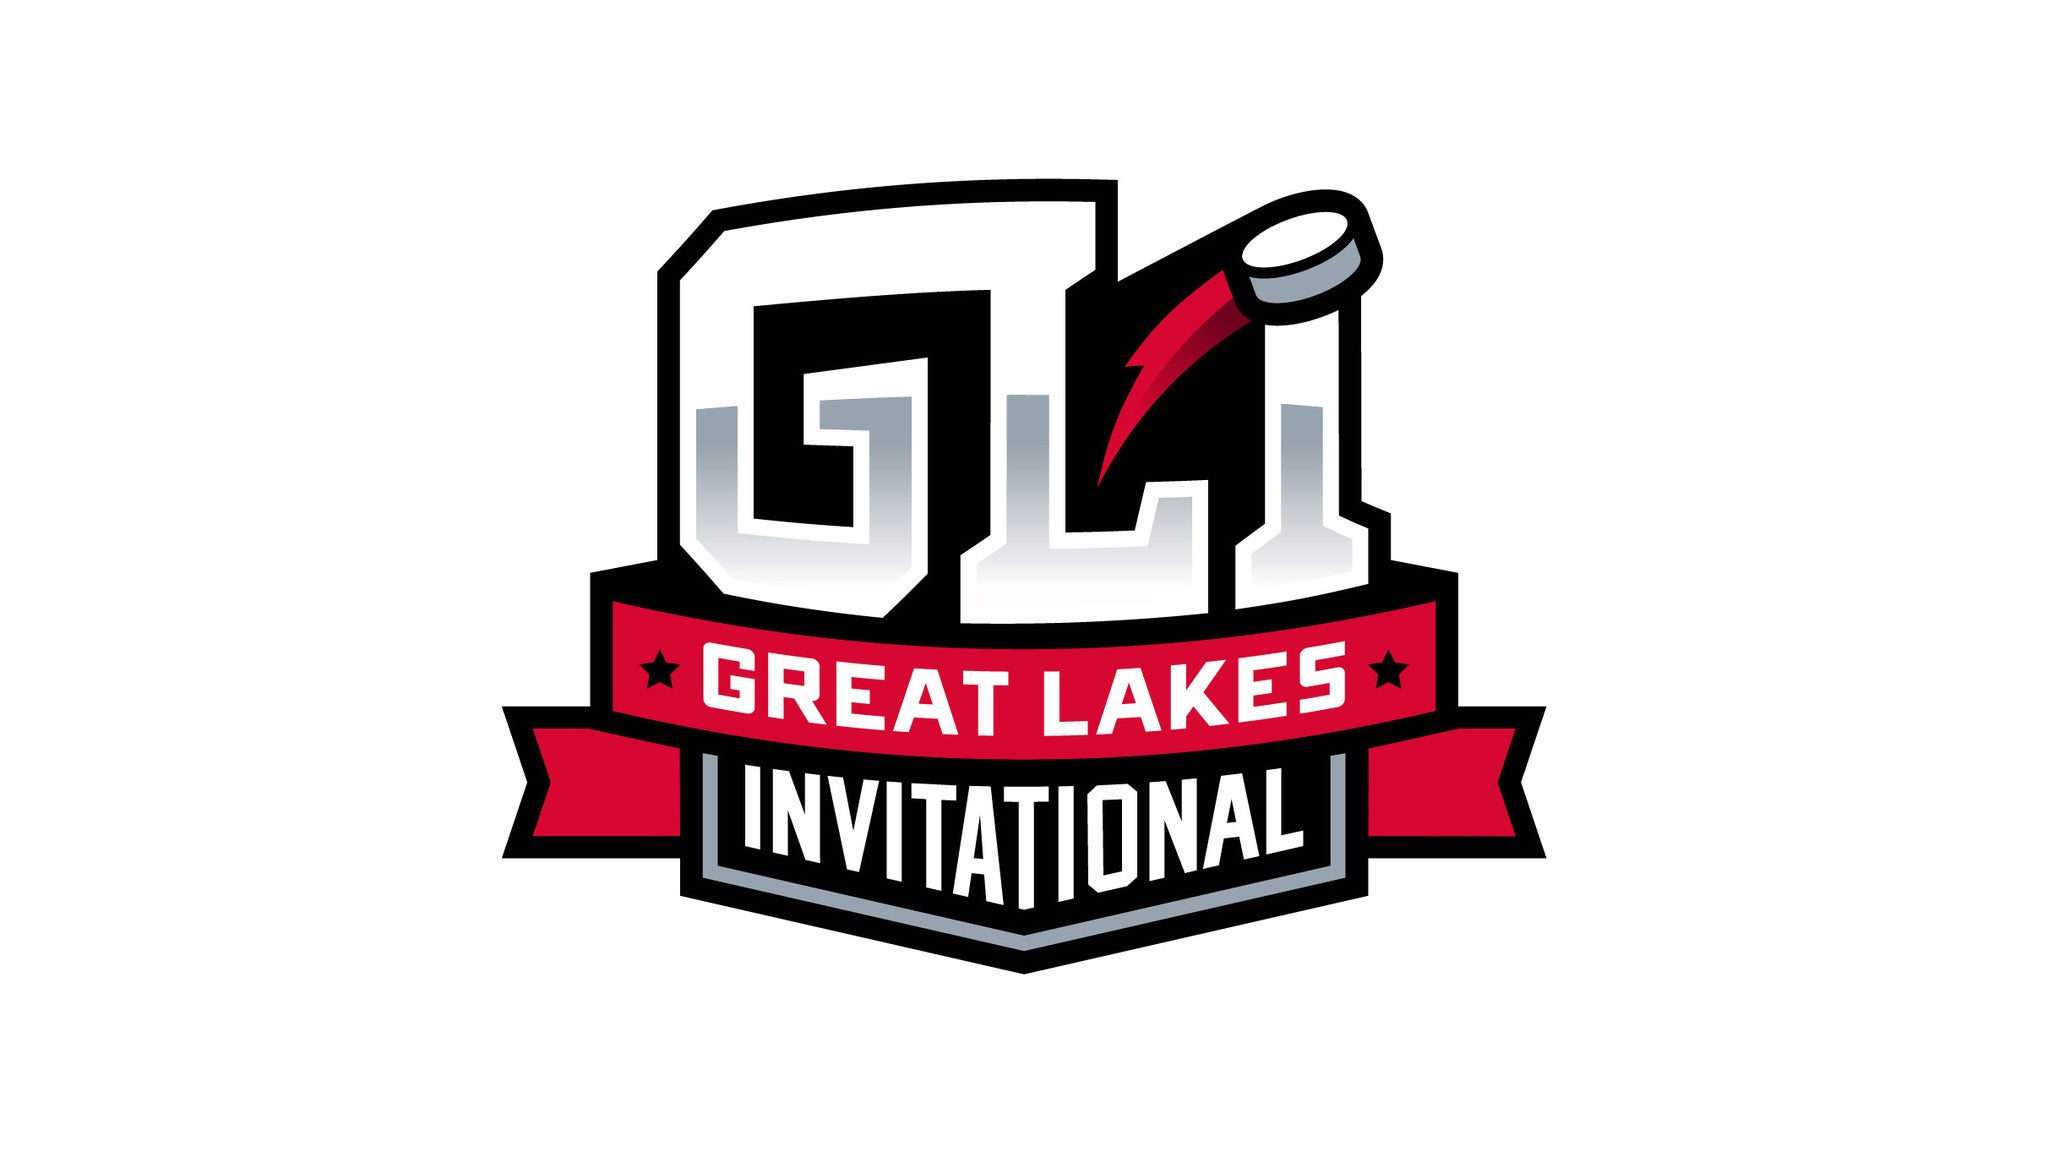 Great Lakes Invitational in Grand Rapids event information